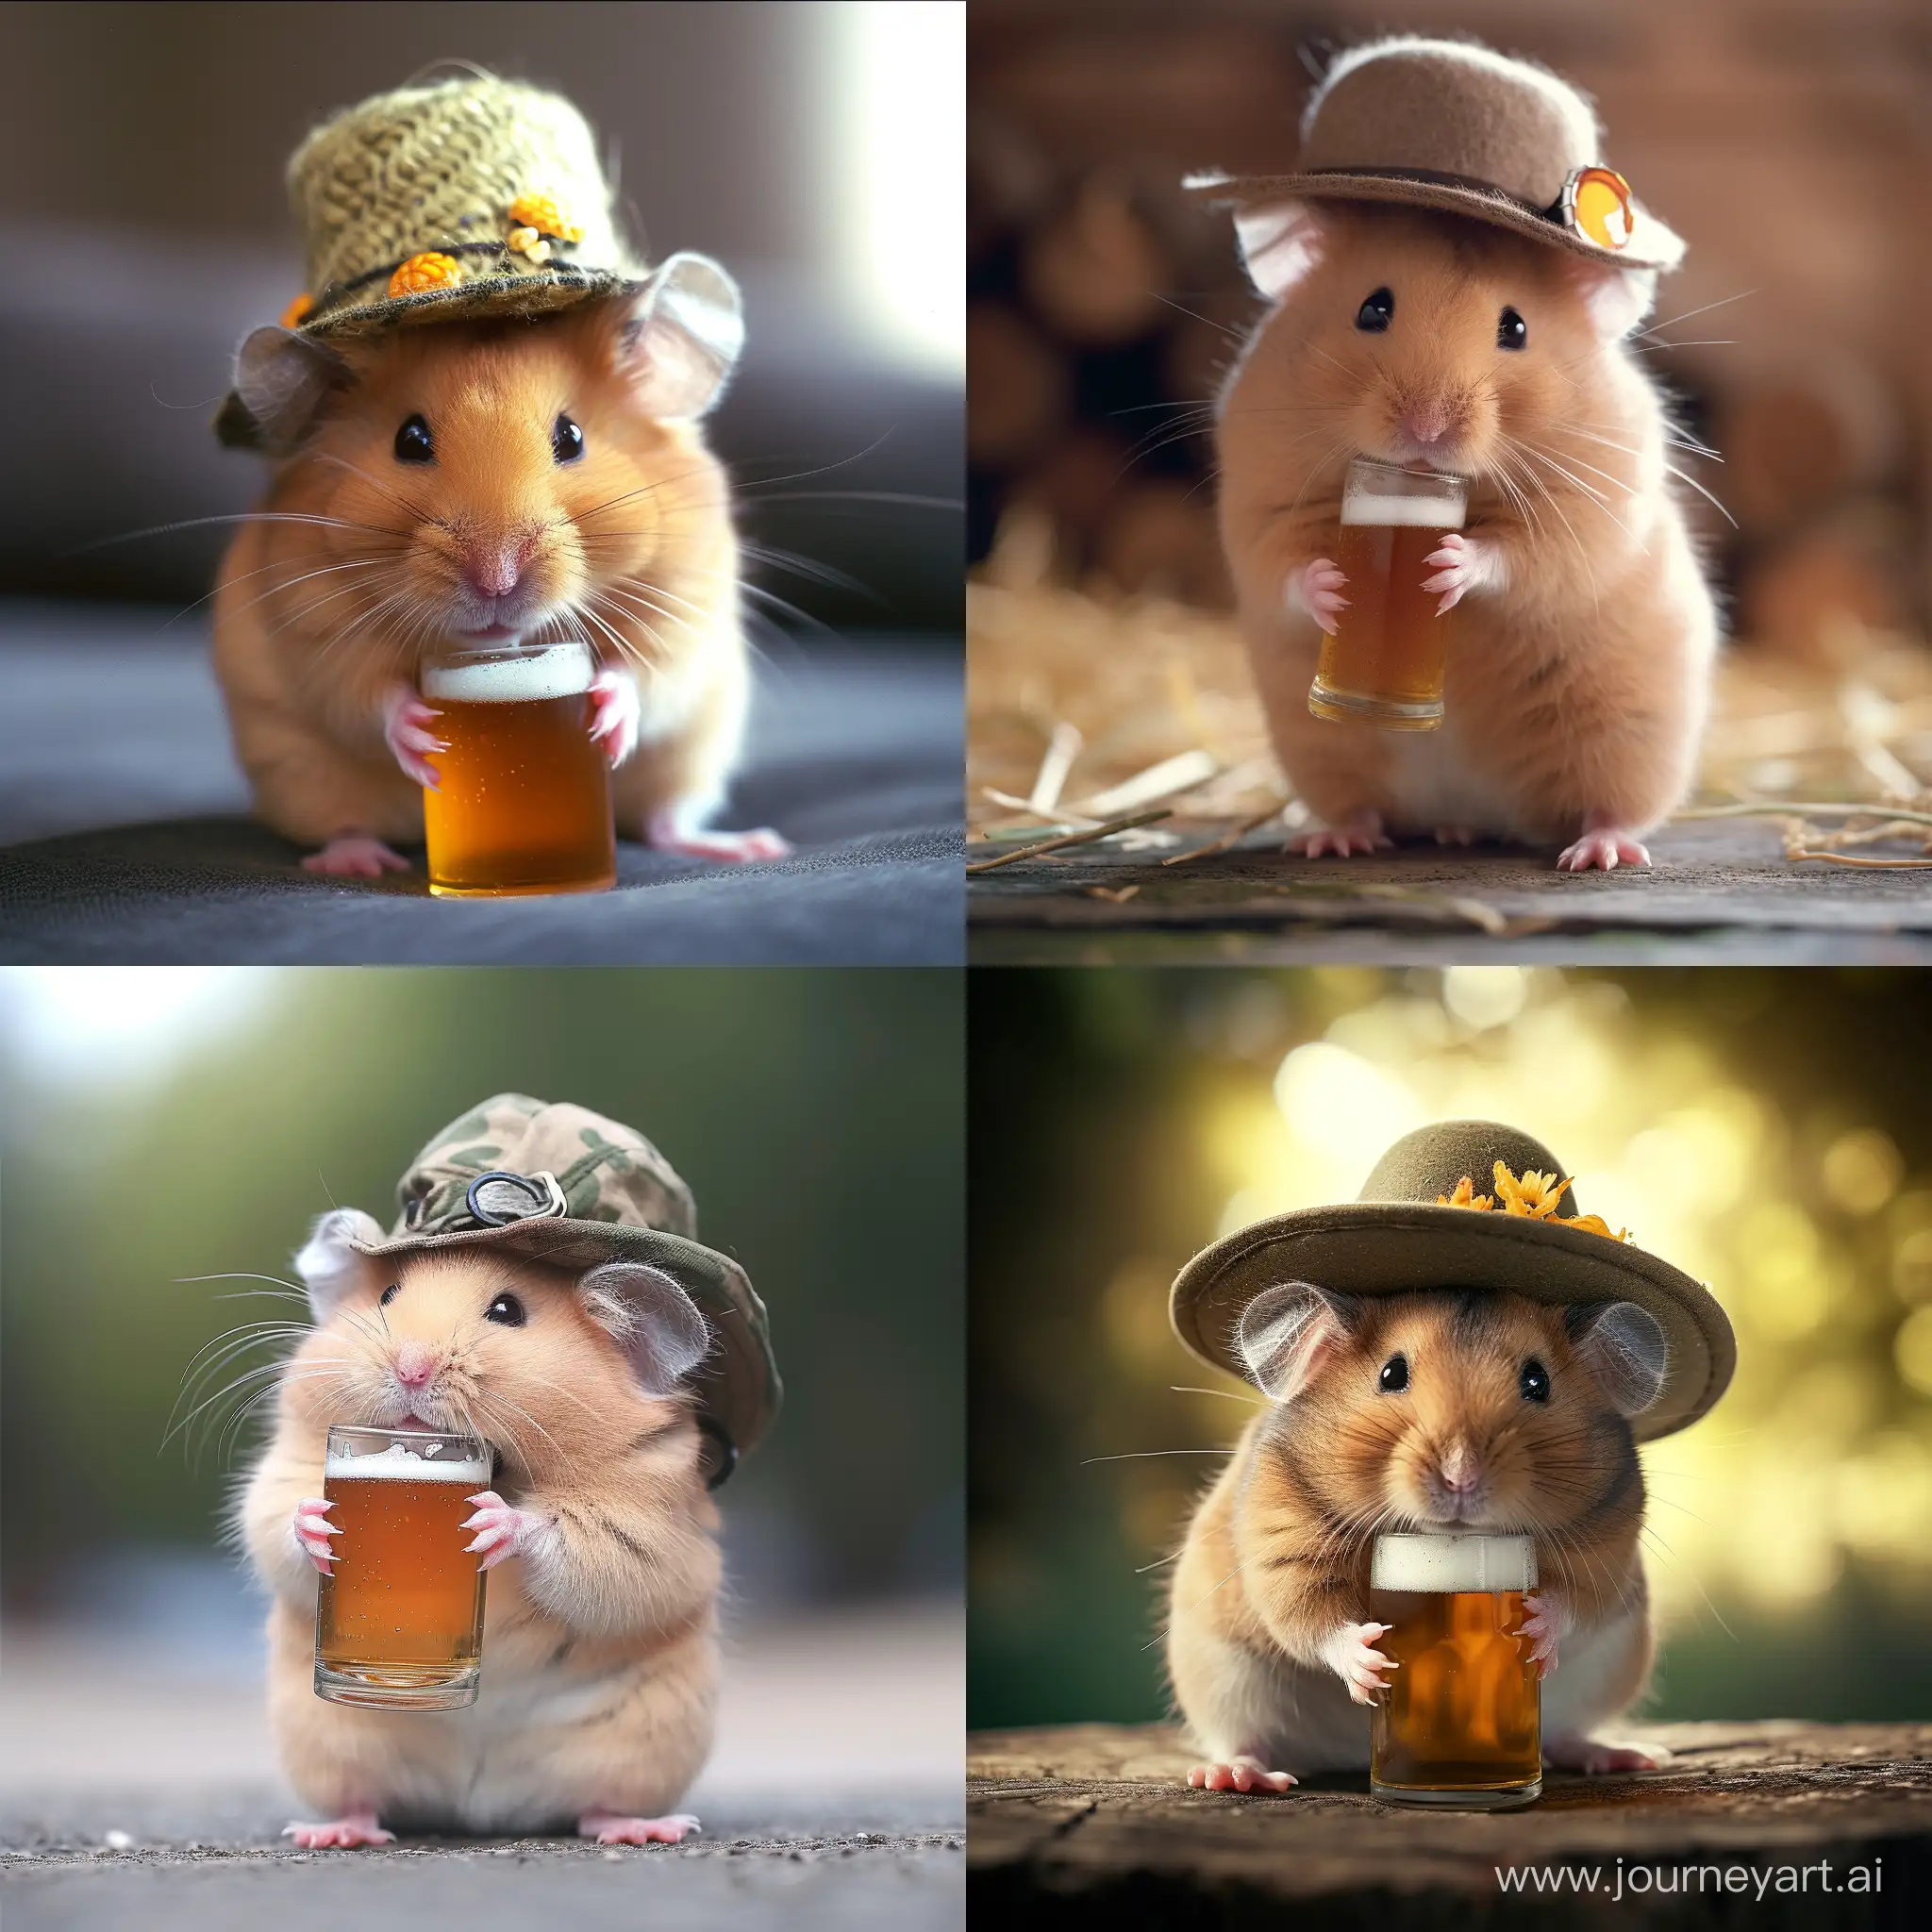 Adorable-Hamster-Enjoying-a-Brew-in-Stylish-Hat